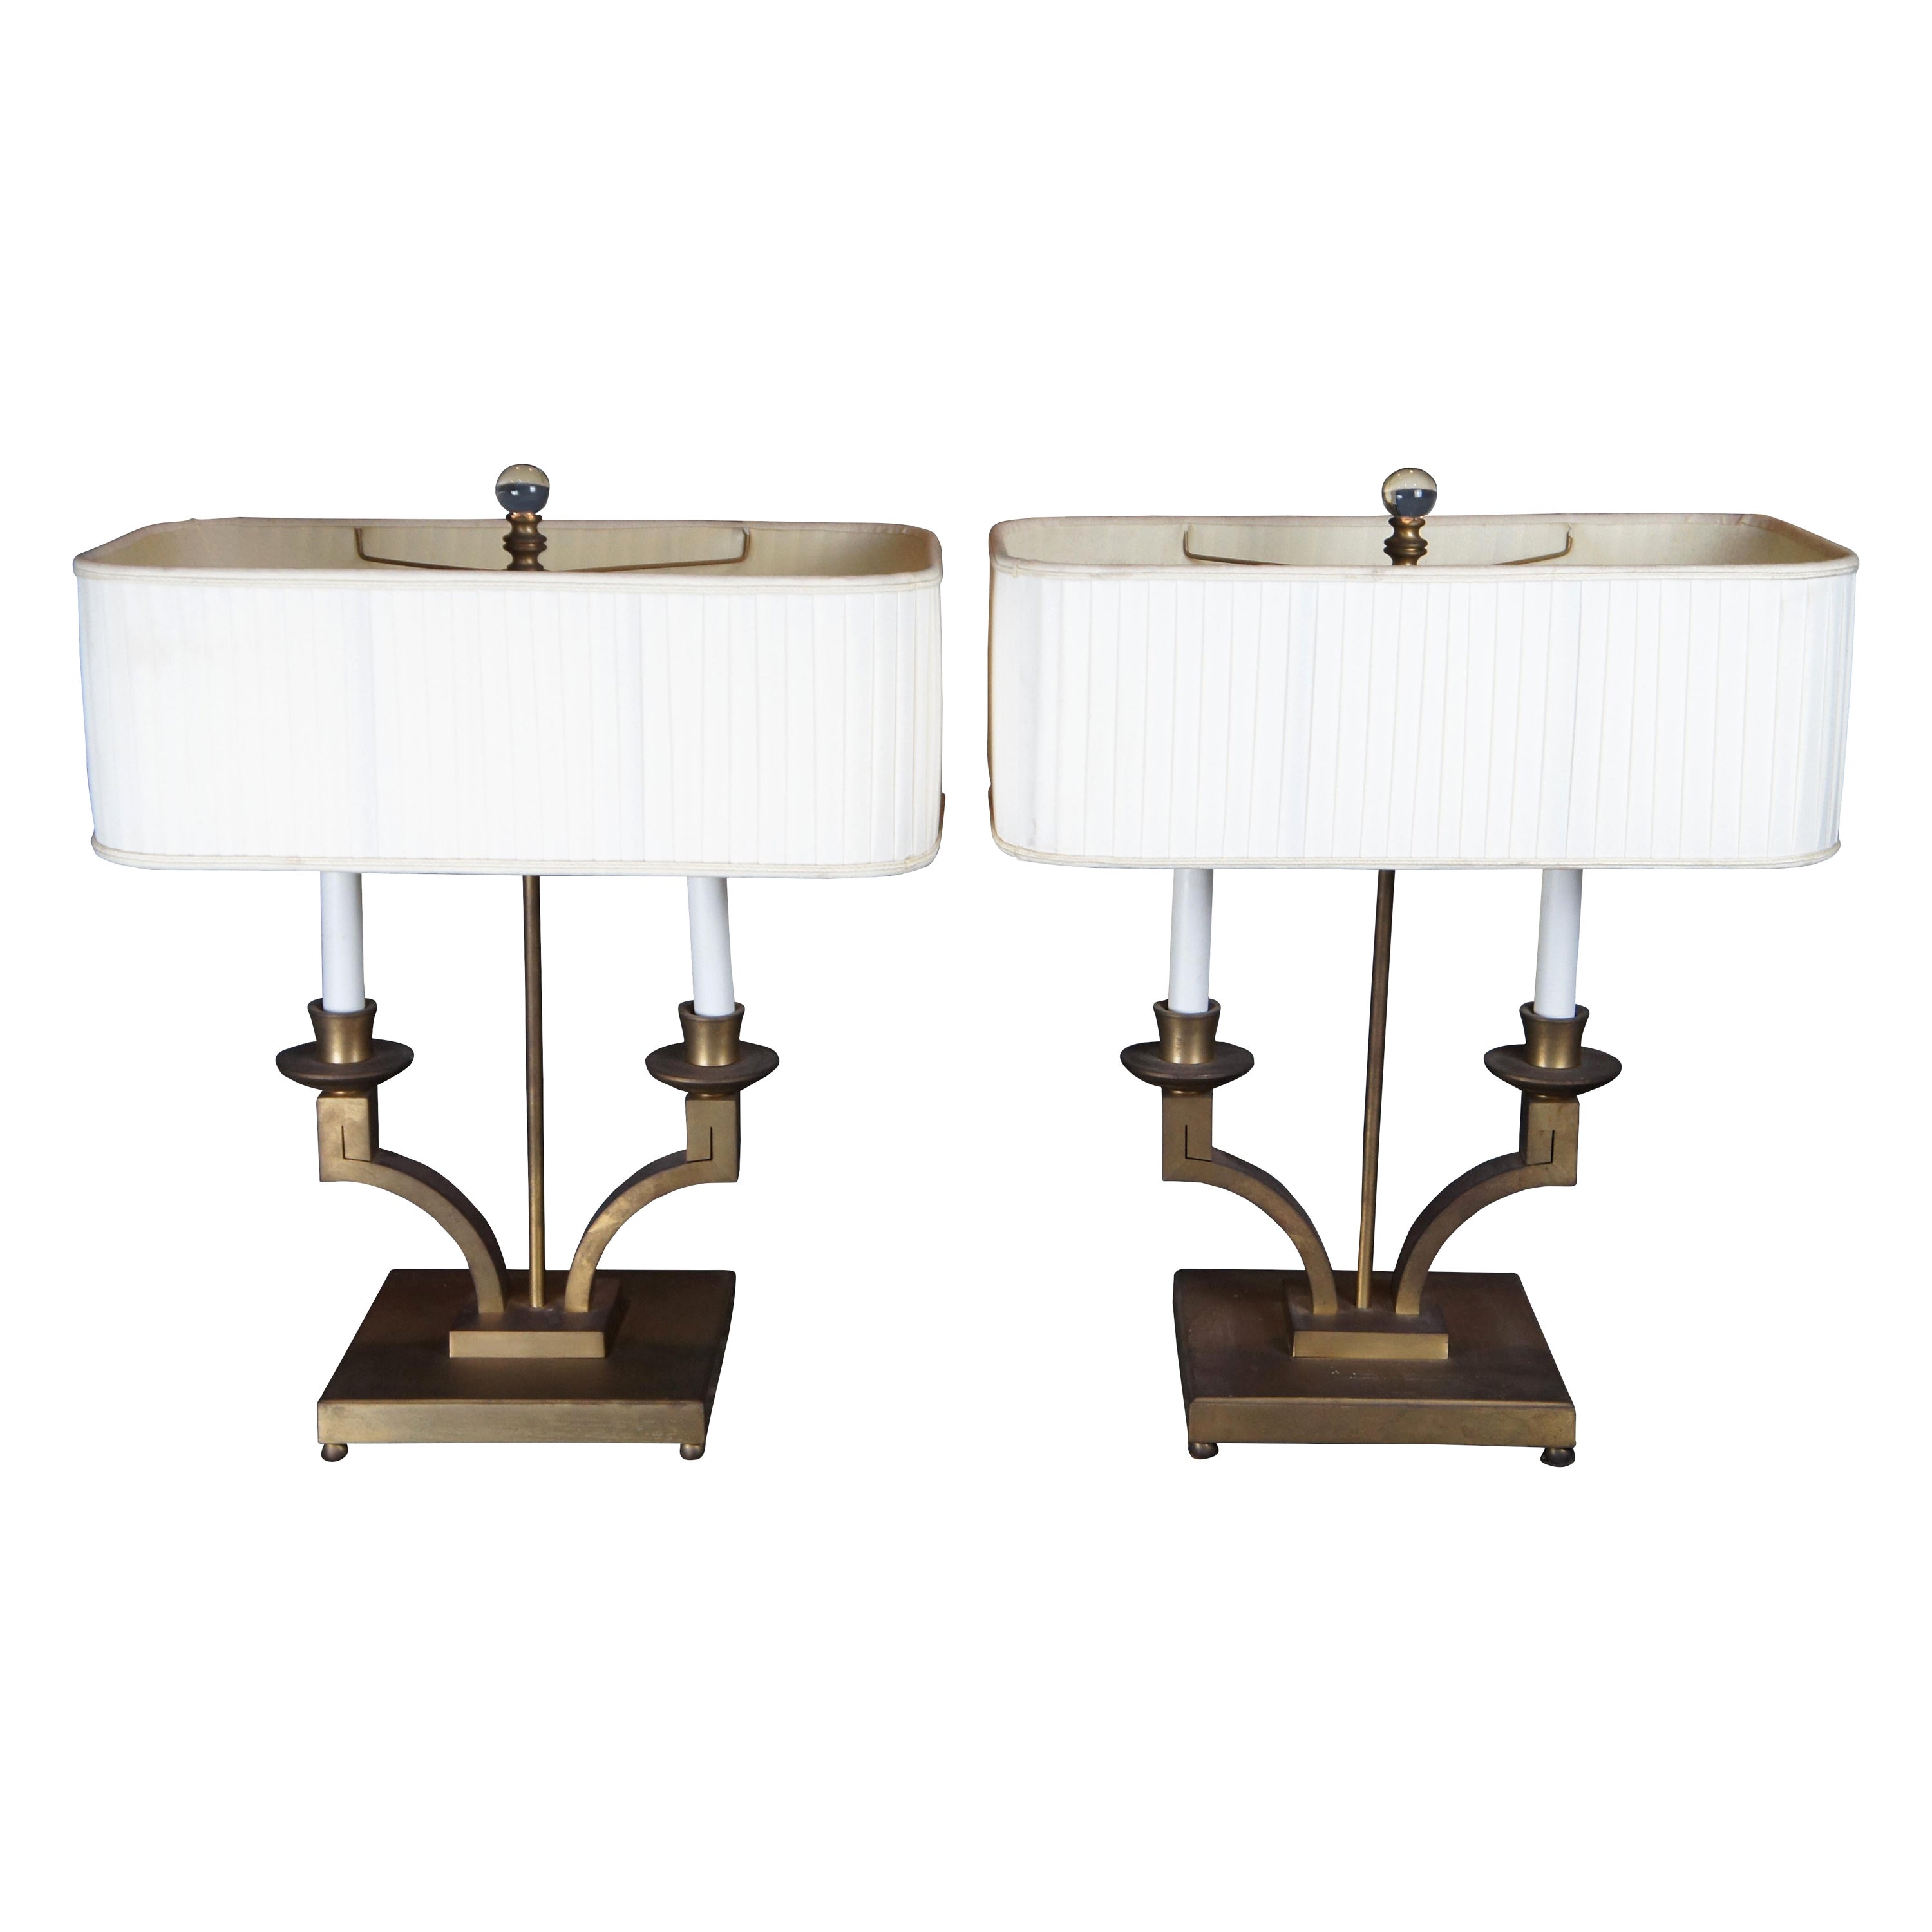 2 Neoclassical Modern Laurent Bouillotte Table Lamps by Baker Jacques Garcia 22"